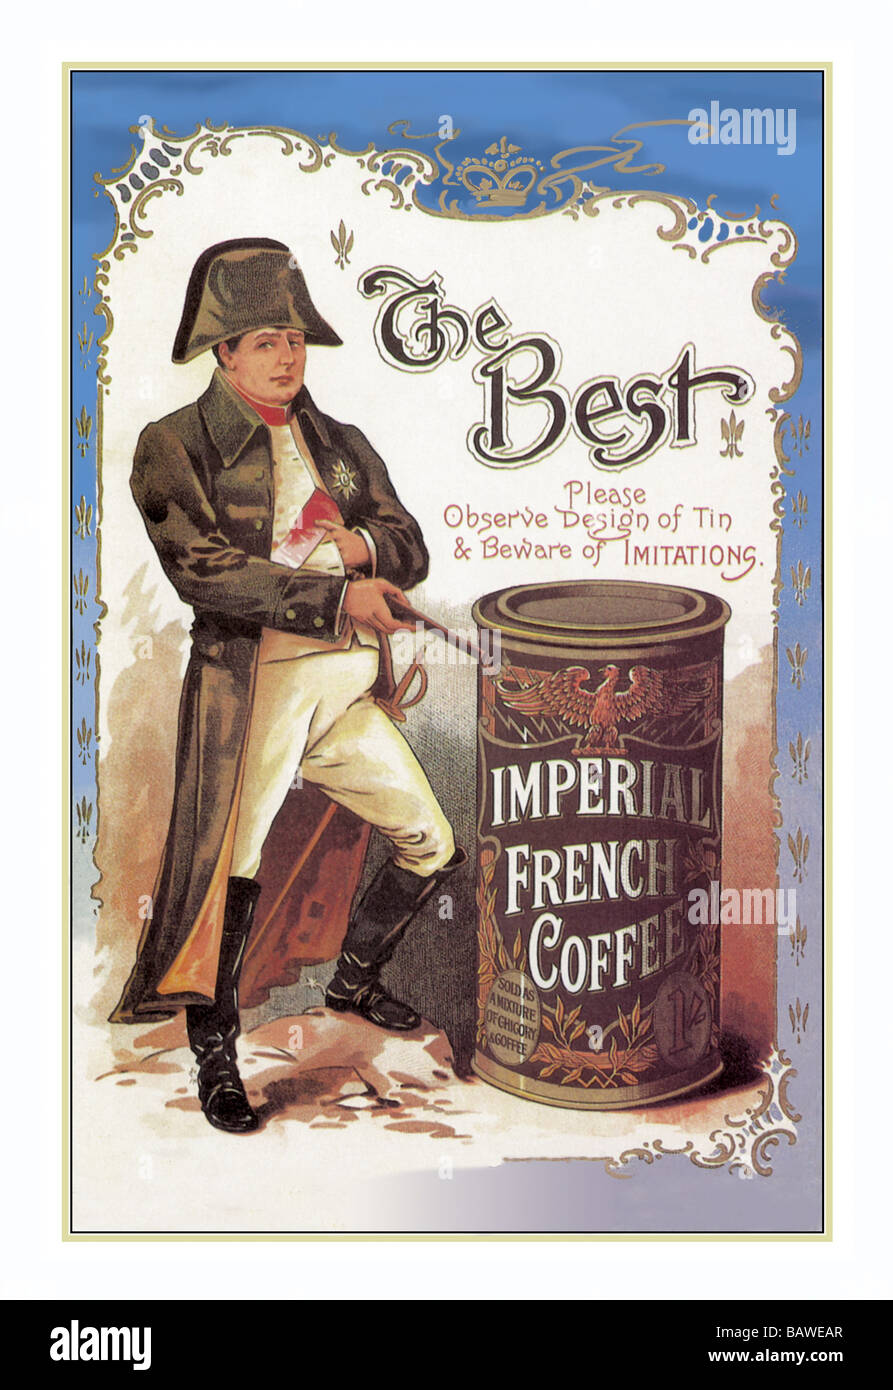 Imperial French Coffee Stock Photo